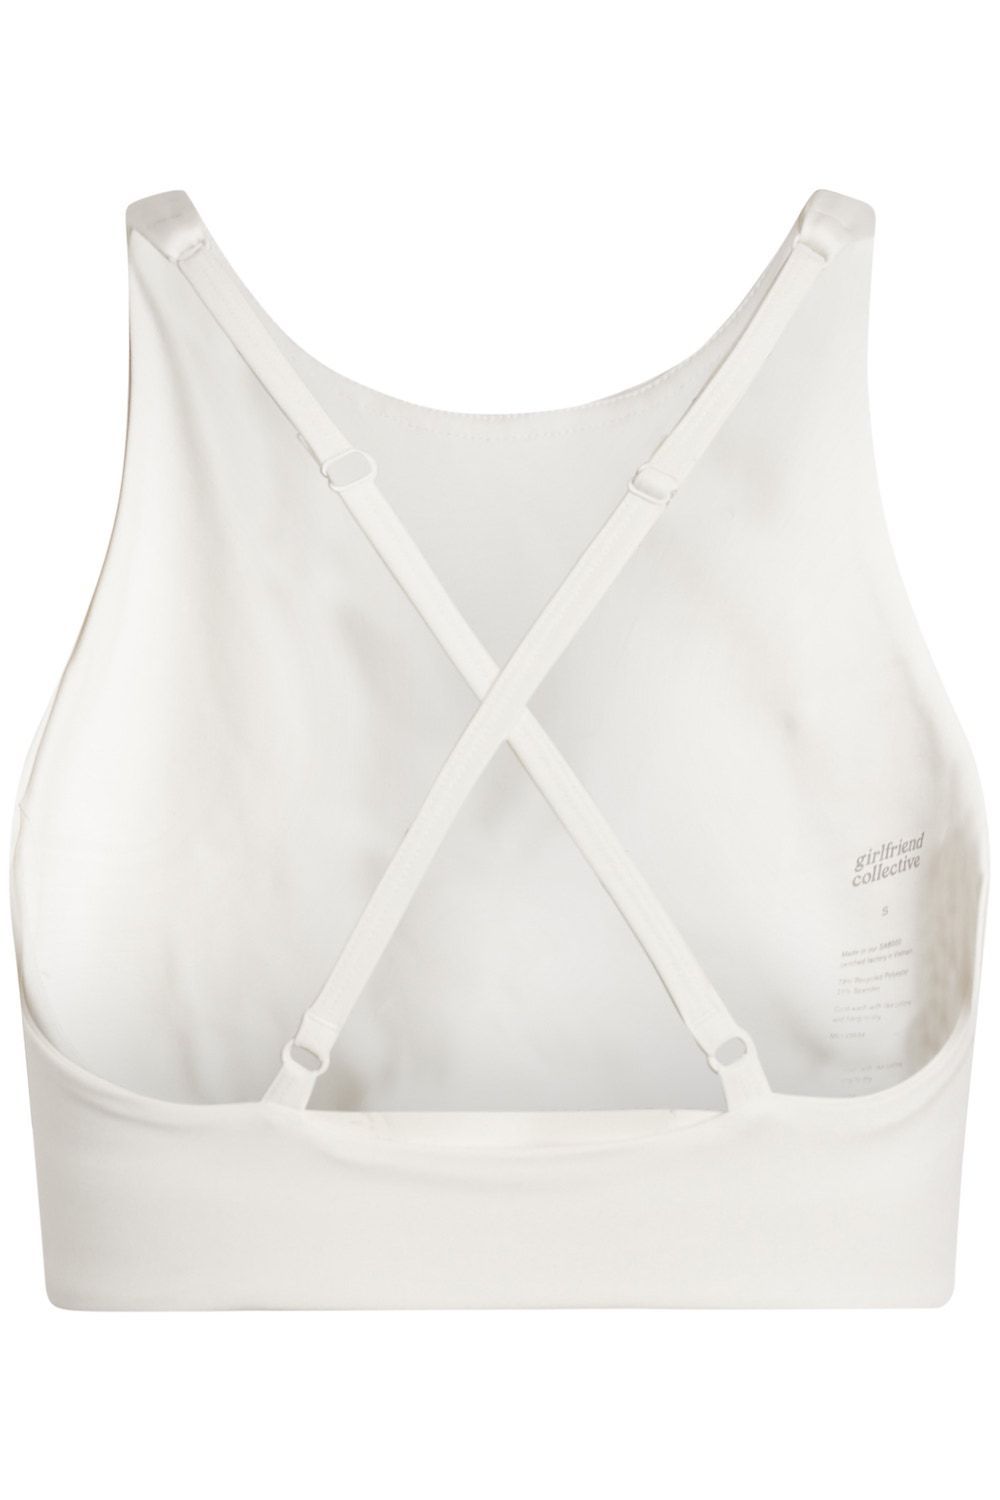 Girlfriend Collective Topanga sports Bra - Made from recycled plastic bottles Ivory Underwear